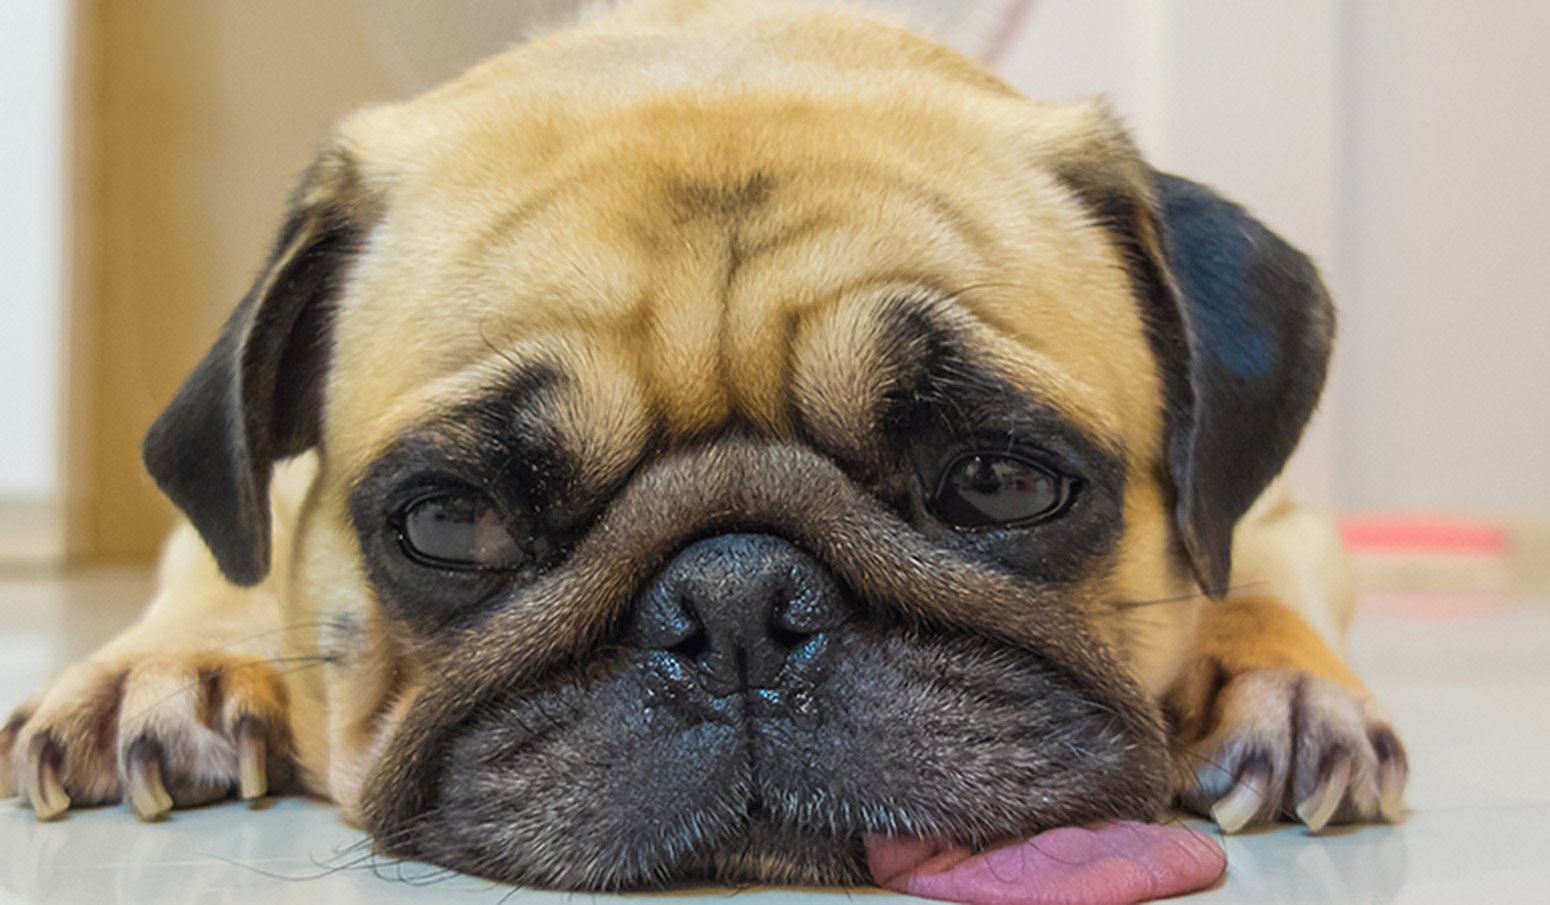 The dog’s face shape suggests how long it will live. Dogs with flat faces, like bulldogs have shorter lives.